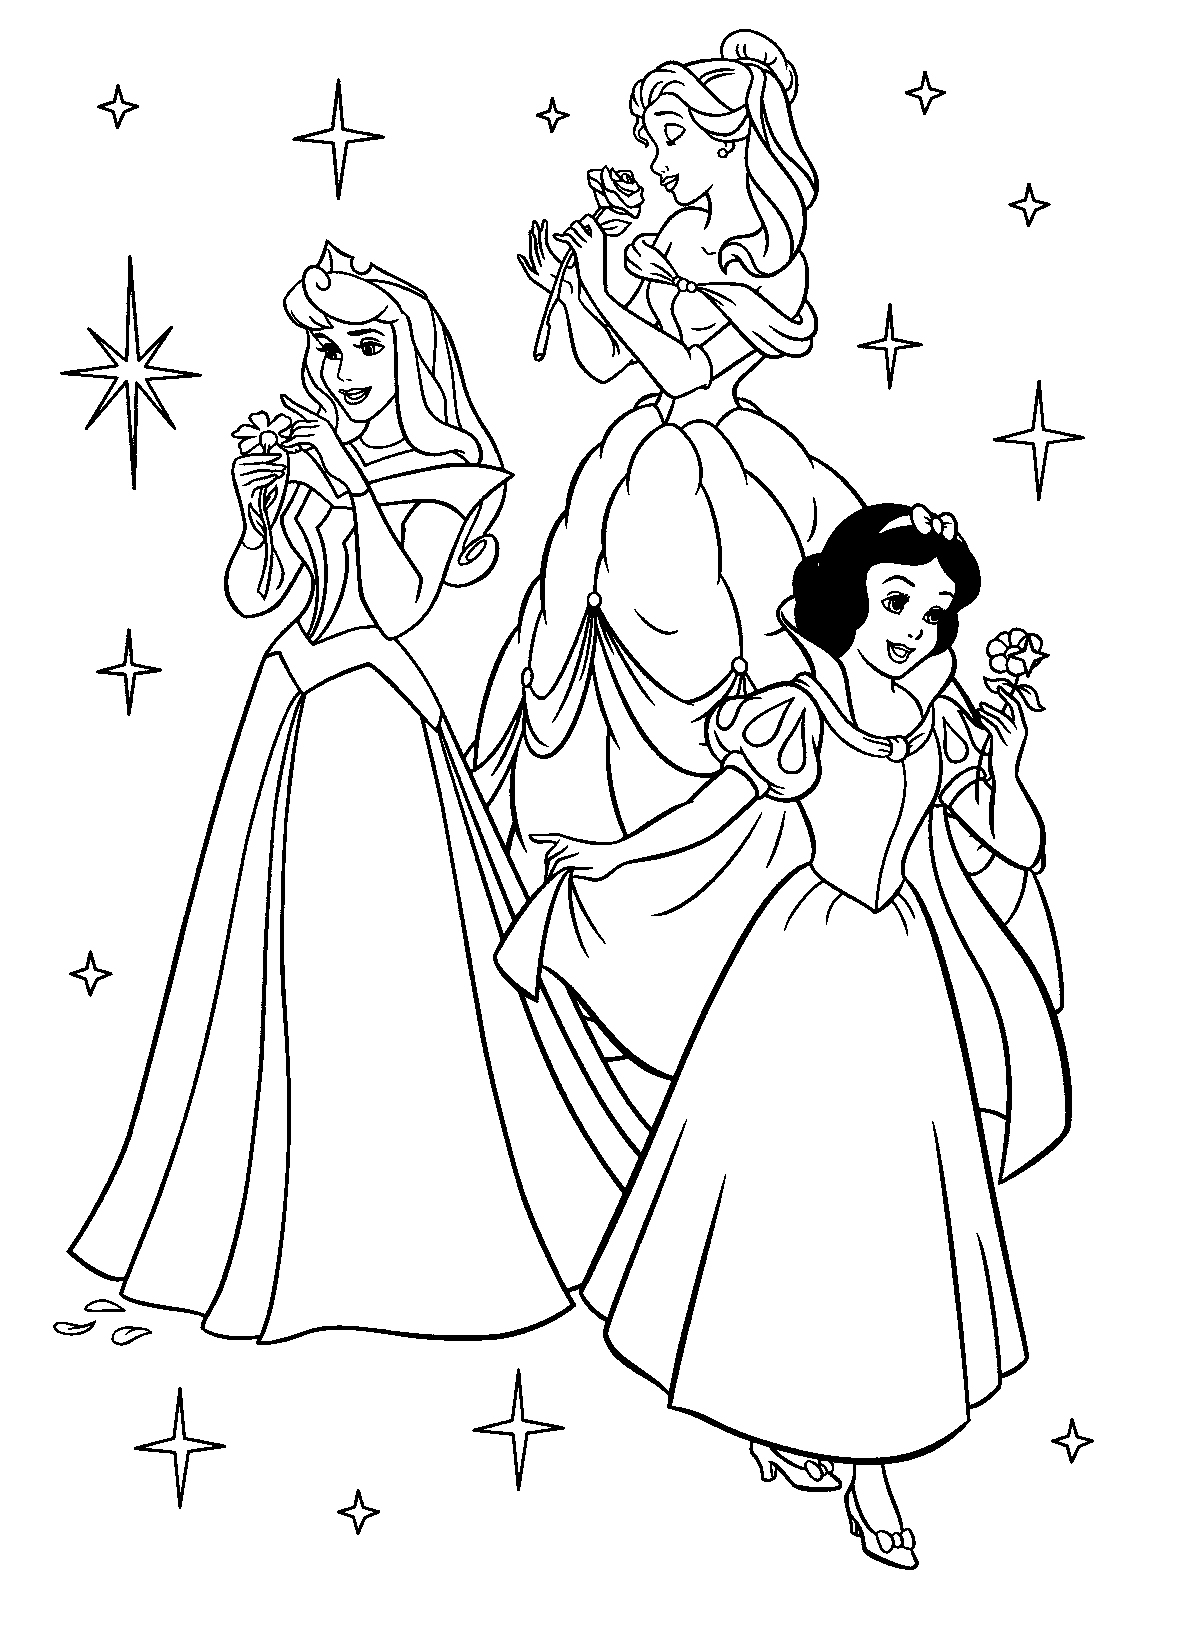 Coloring Pages For Free Disney Rsad Coloring Pages Kleurplaten Disney Kleurplaten Disney Prinsessen